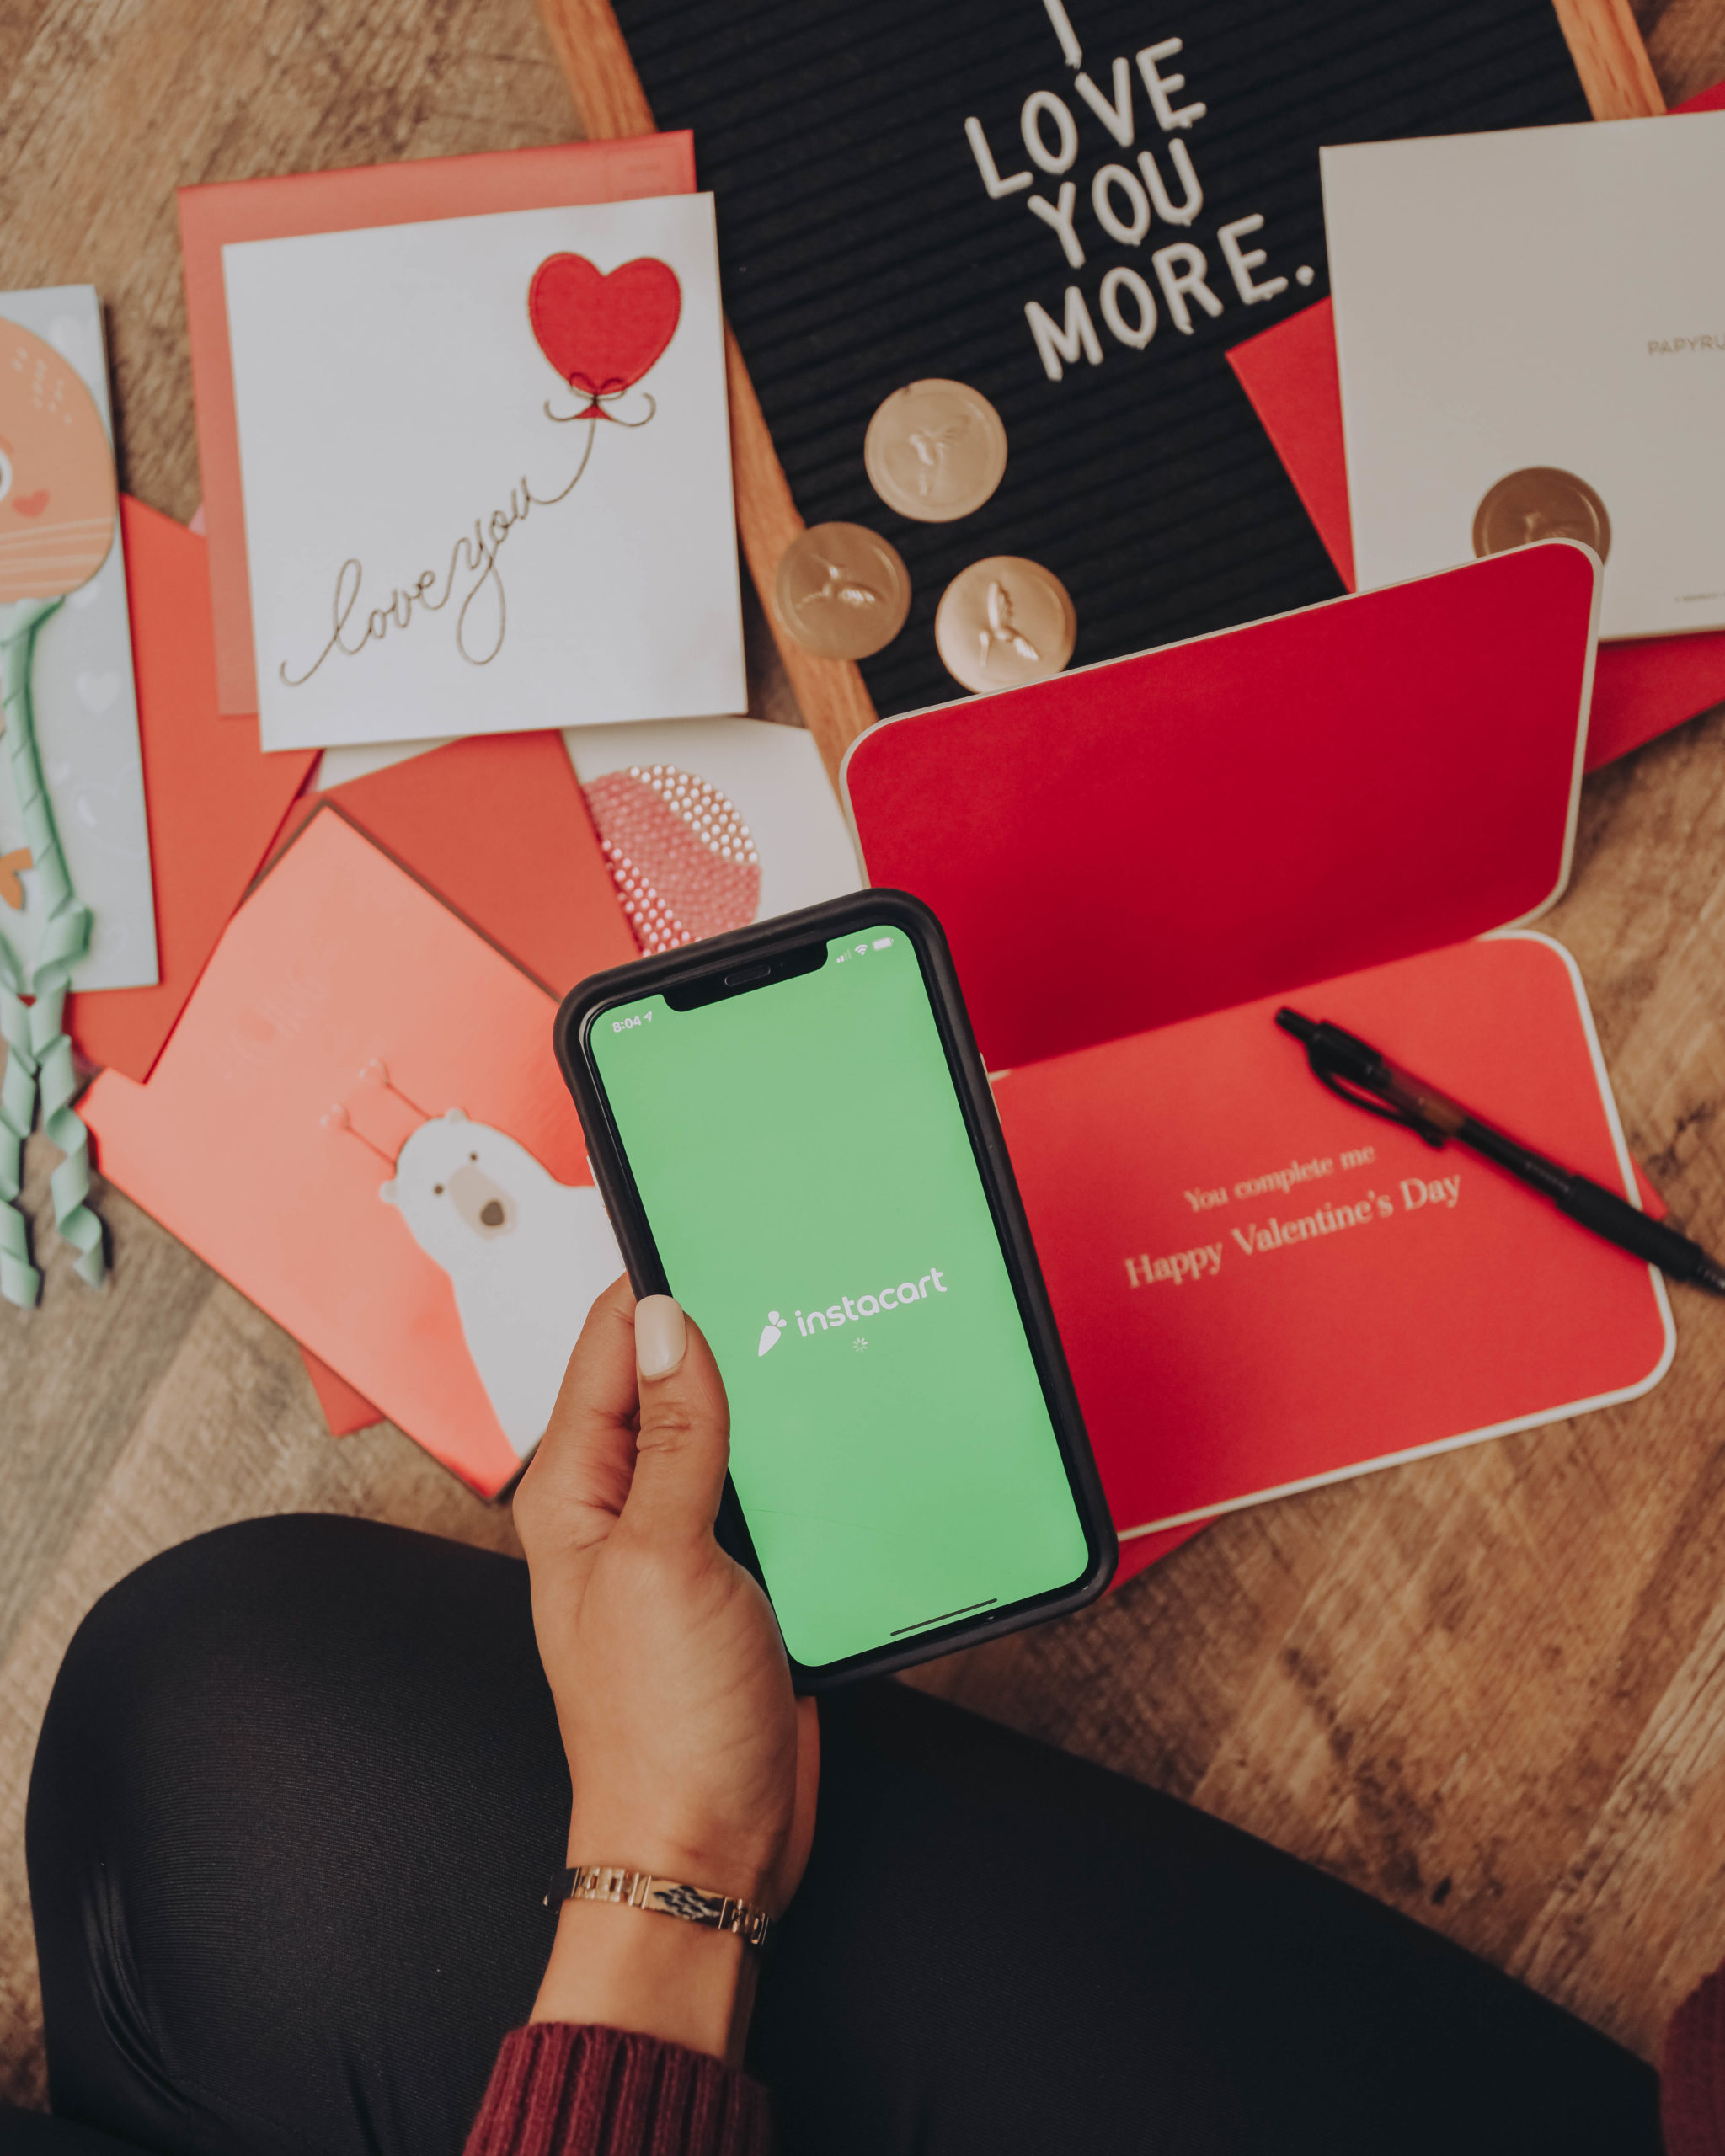 Instacart and Valentines cards